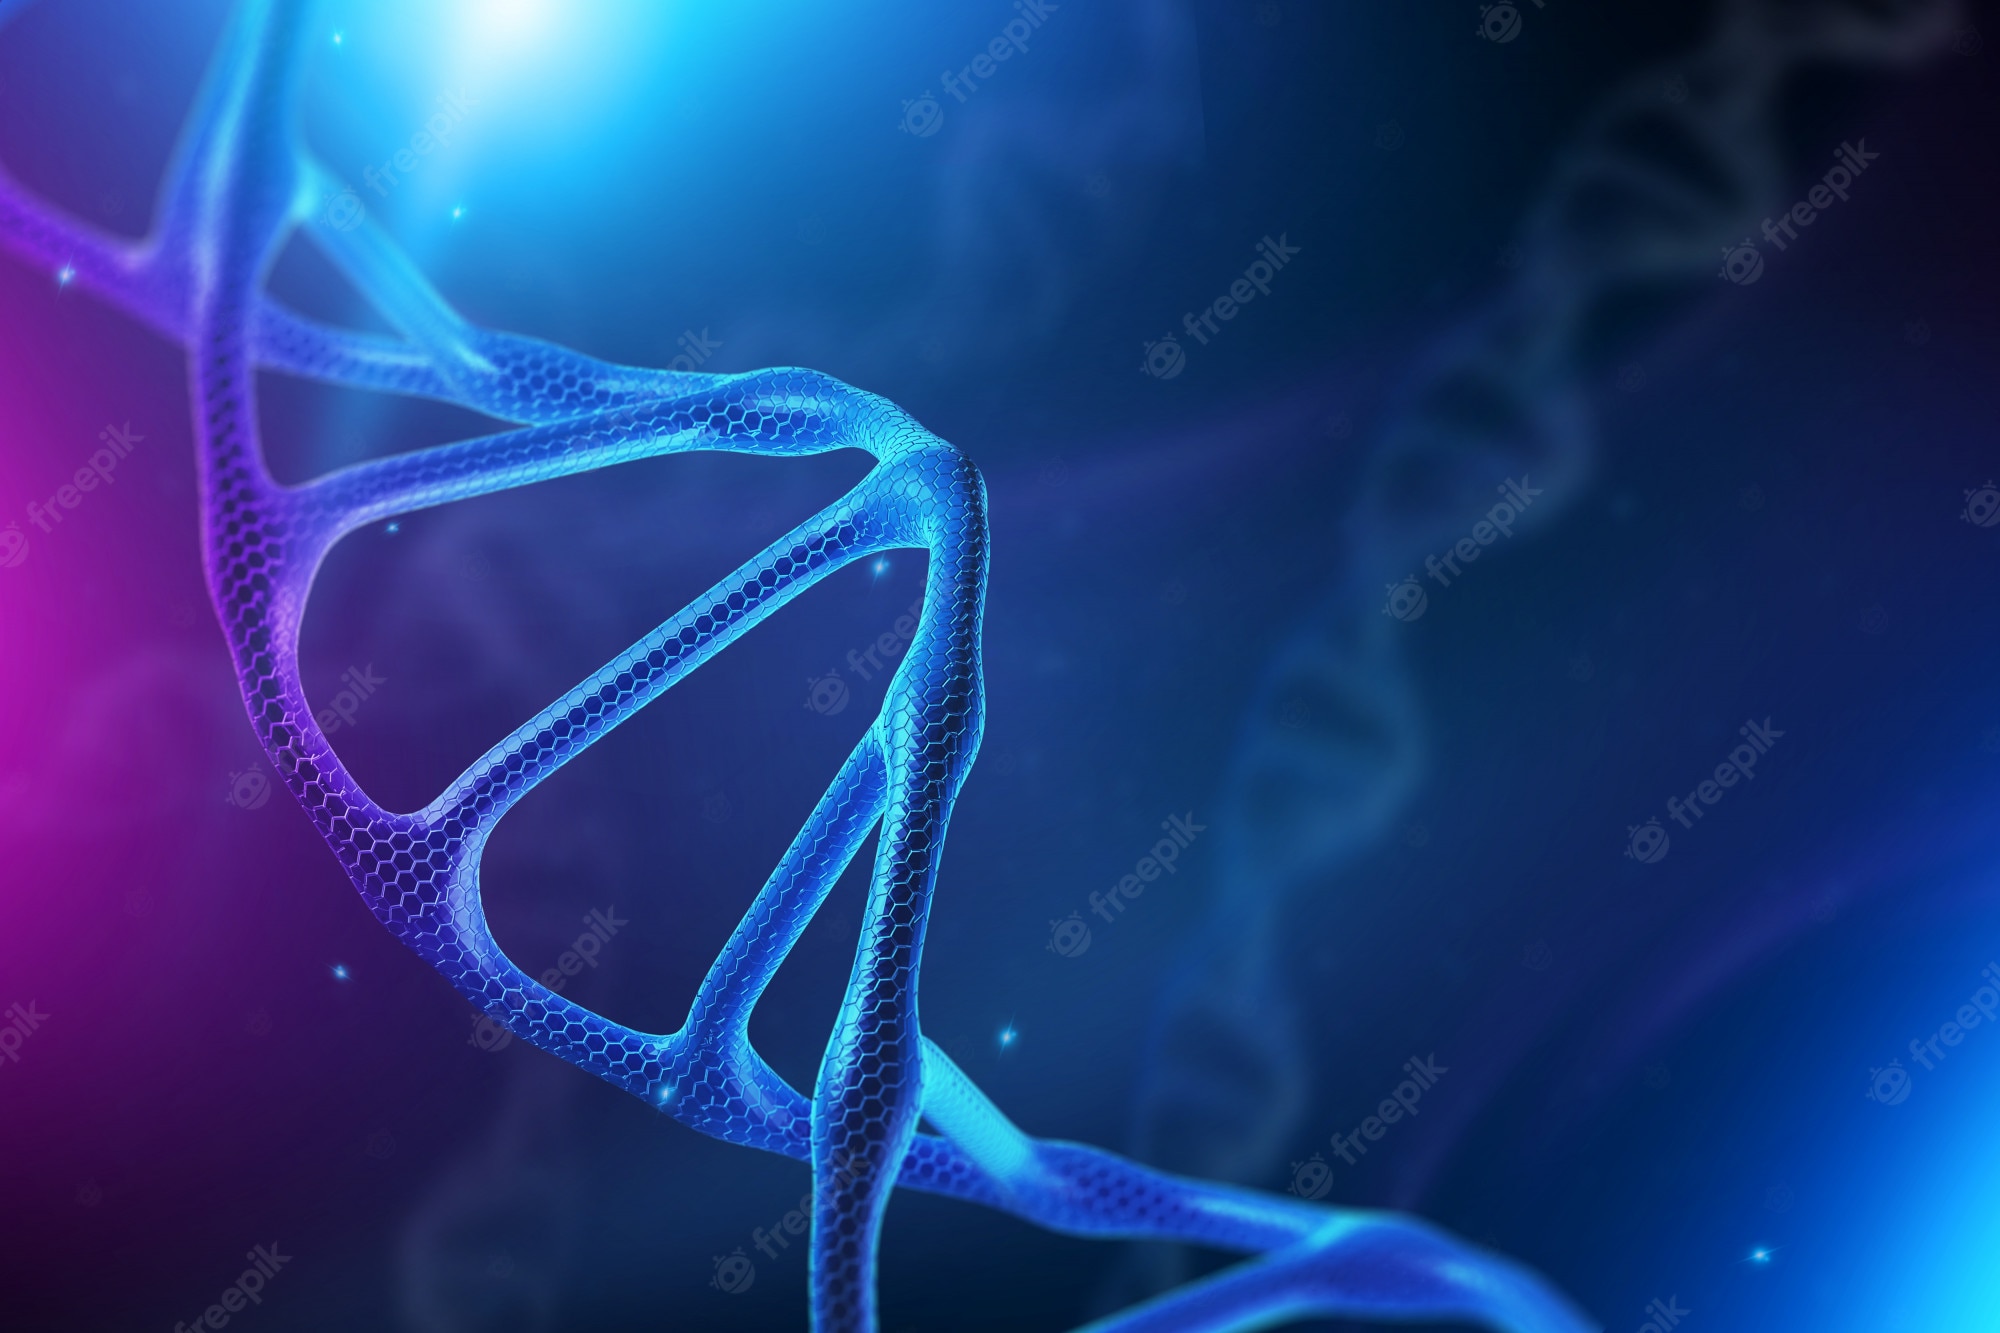 Dna Structure Wallpapers